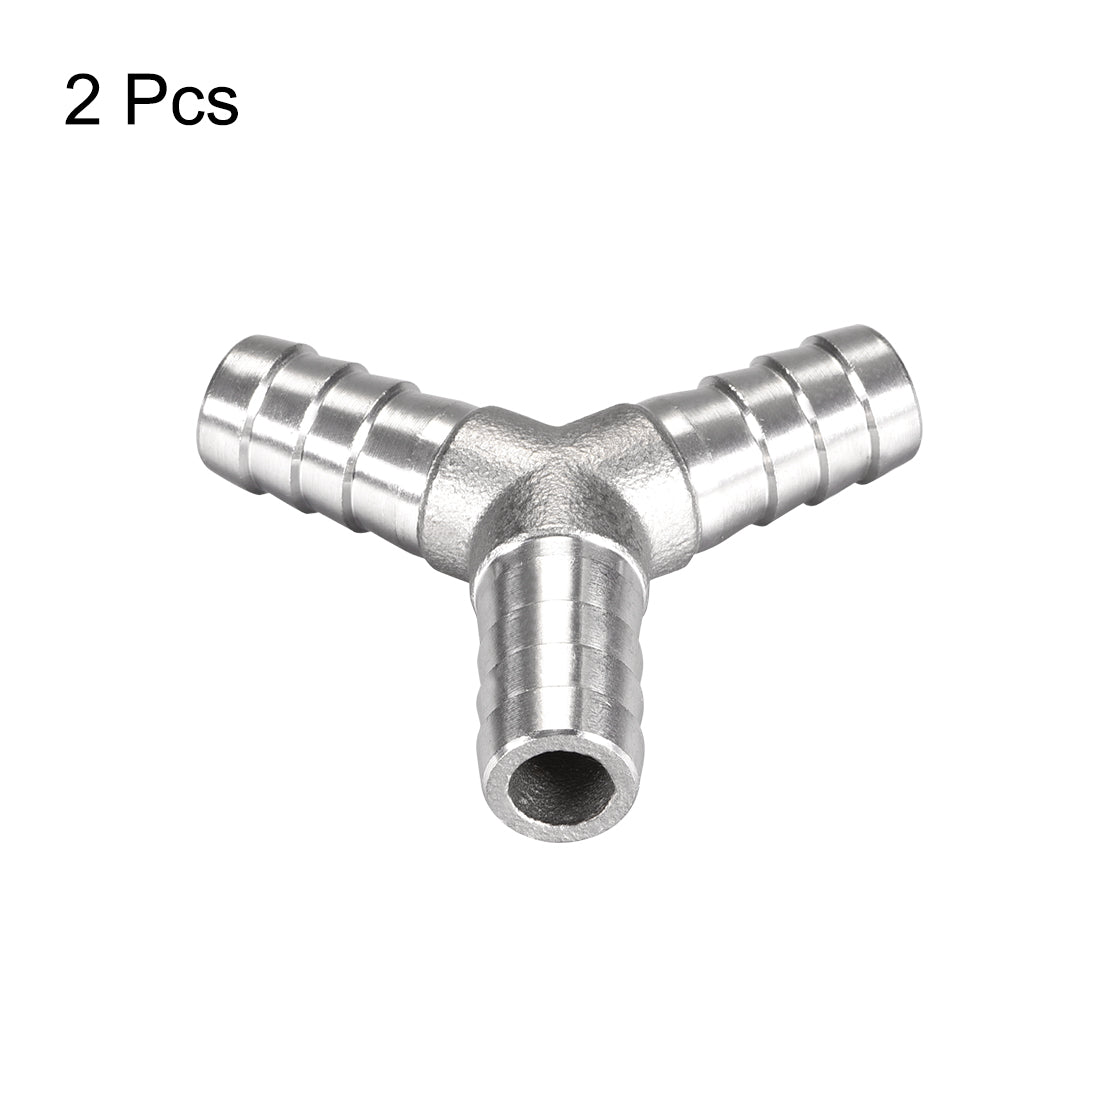 uxcell Uxcell 5/8-Inch (16mm) Hose ID Barb Fitting Stainless Steel 3 Way Y-Shaped Union Home Brew Fitting 2pcs